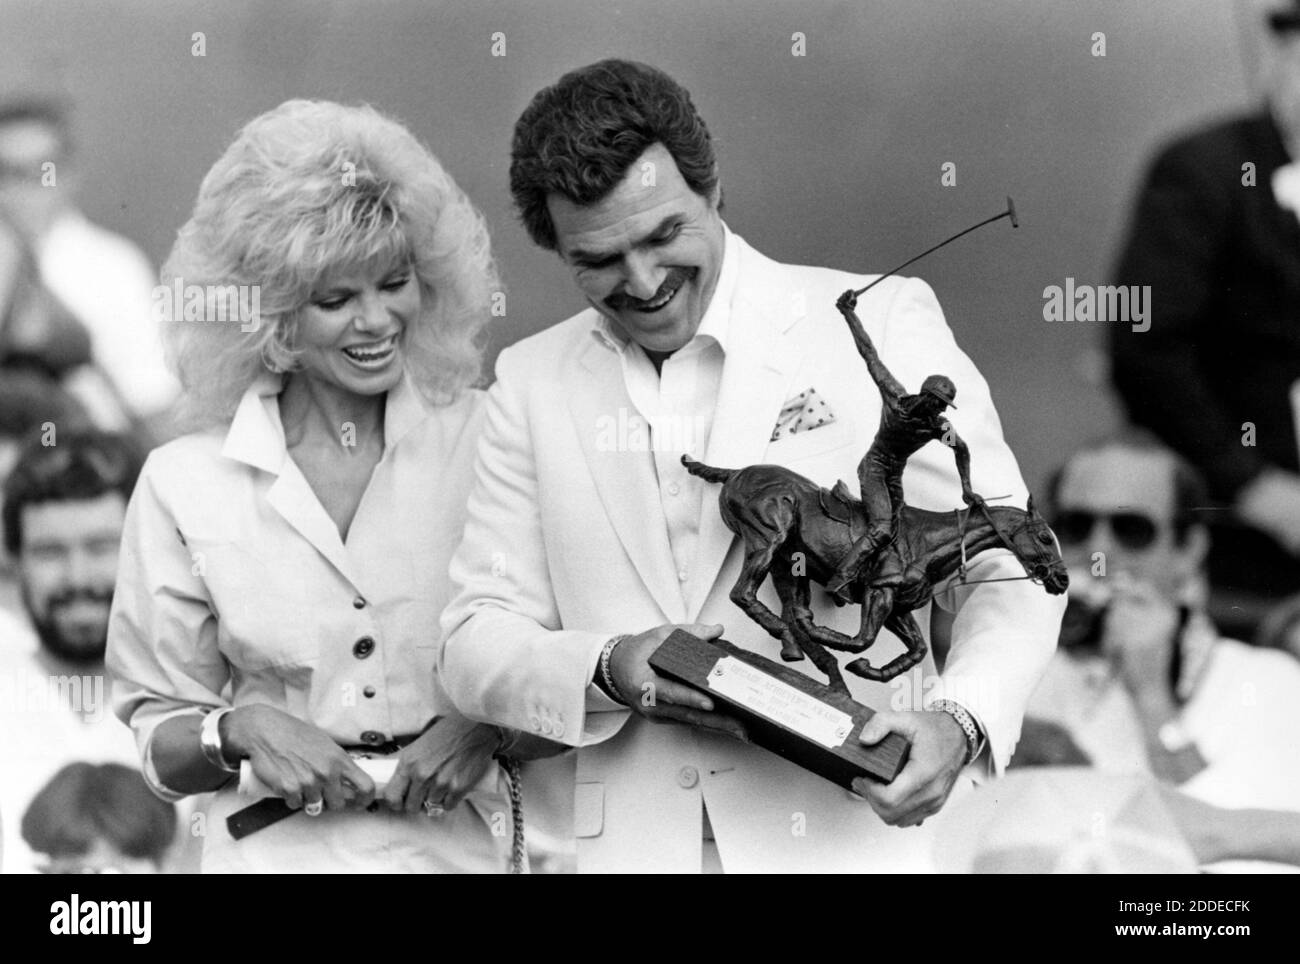 NO FILM, NO VIDEO, NO TV, NO DOCUMENTARY - File photo - Burt Reynolds and Loni Anderson at Royal Palm Polo in Boca Raton, Fla. on March 15 1987. Burt Reynolds and his girlfriend Loni Anderson look at Burt's decade achiever award Sunday afternoon. Reynolds and Anderson flew in by helicopter before a polo match to receive the award. 1970s' movie heartthrob and Oscar nominee Burt Reynolds has died at the age of 82. He reportedly passed away in a Florida hospital from a heart attack with his family by his side. Photo by Anne Ryan/Sun Sentinel/TNS/ABACAPRESS.COM Stock Photo